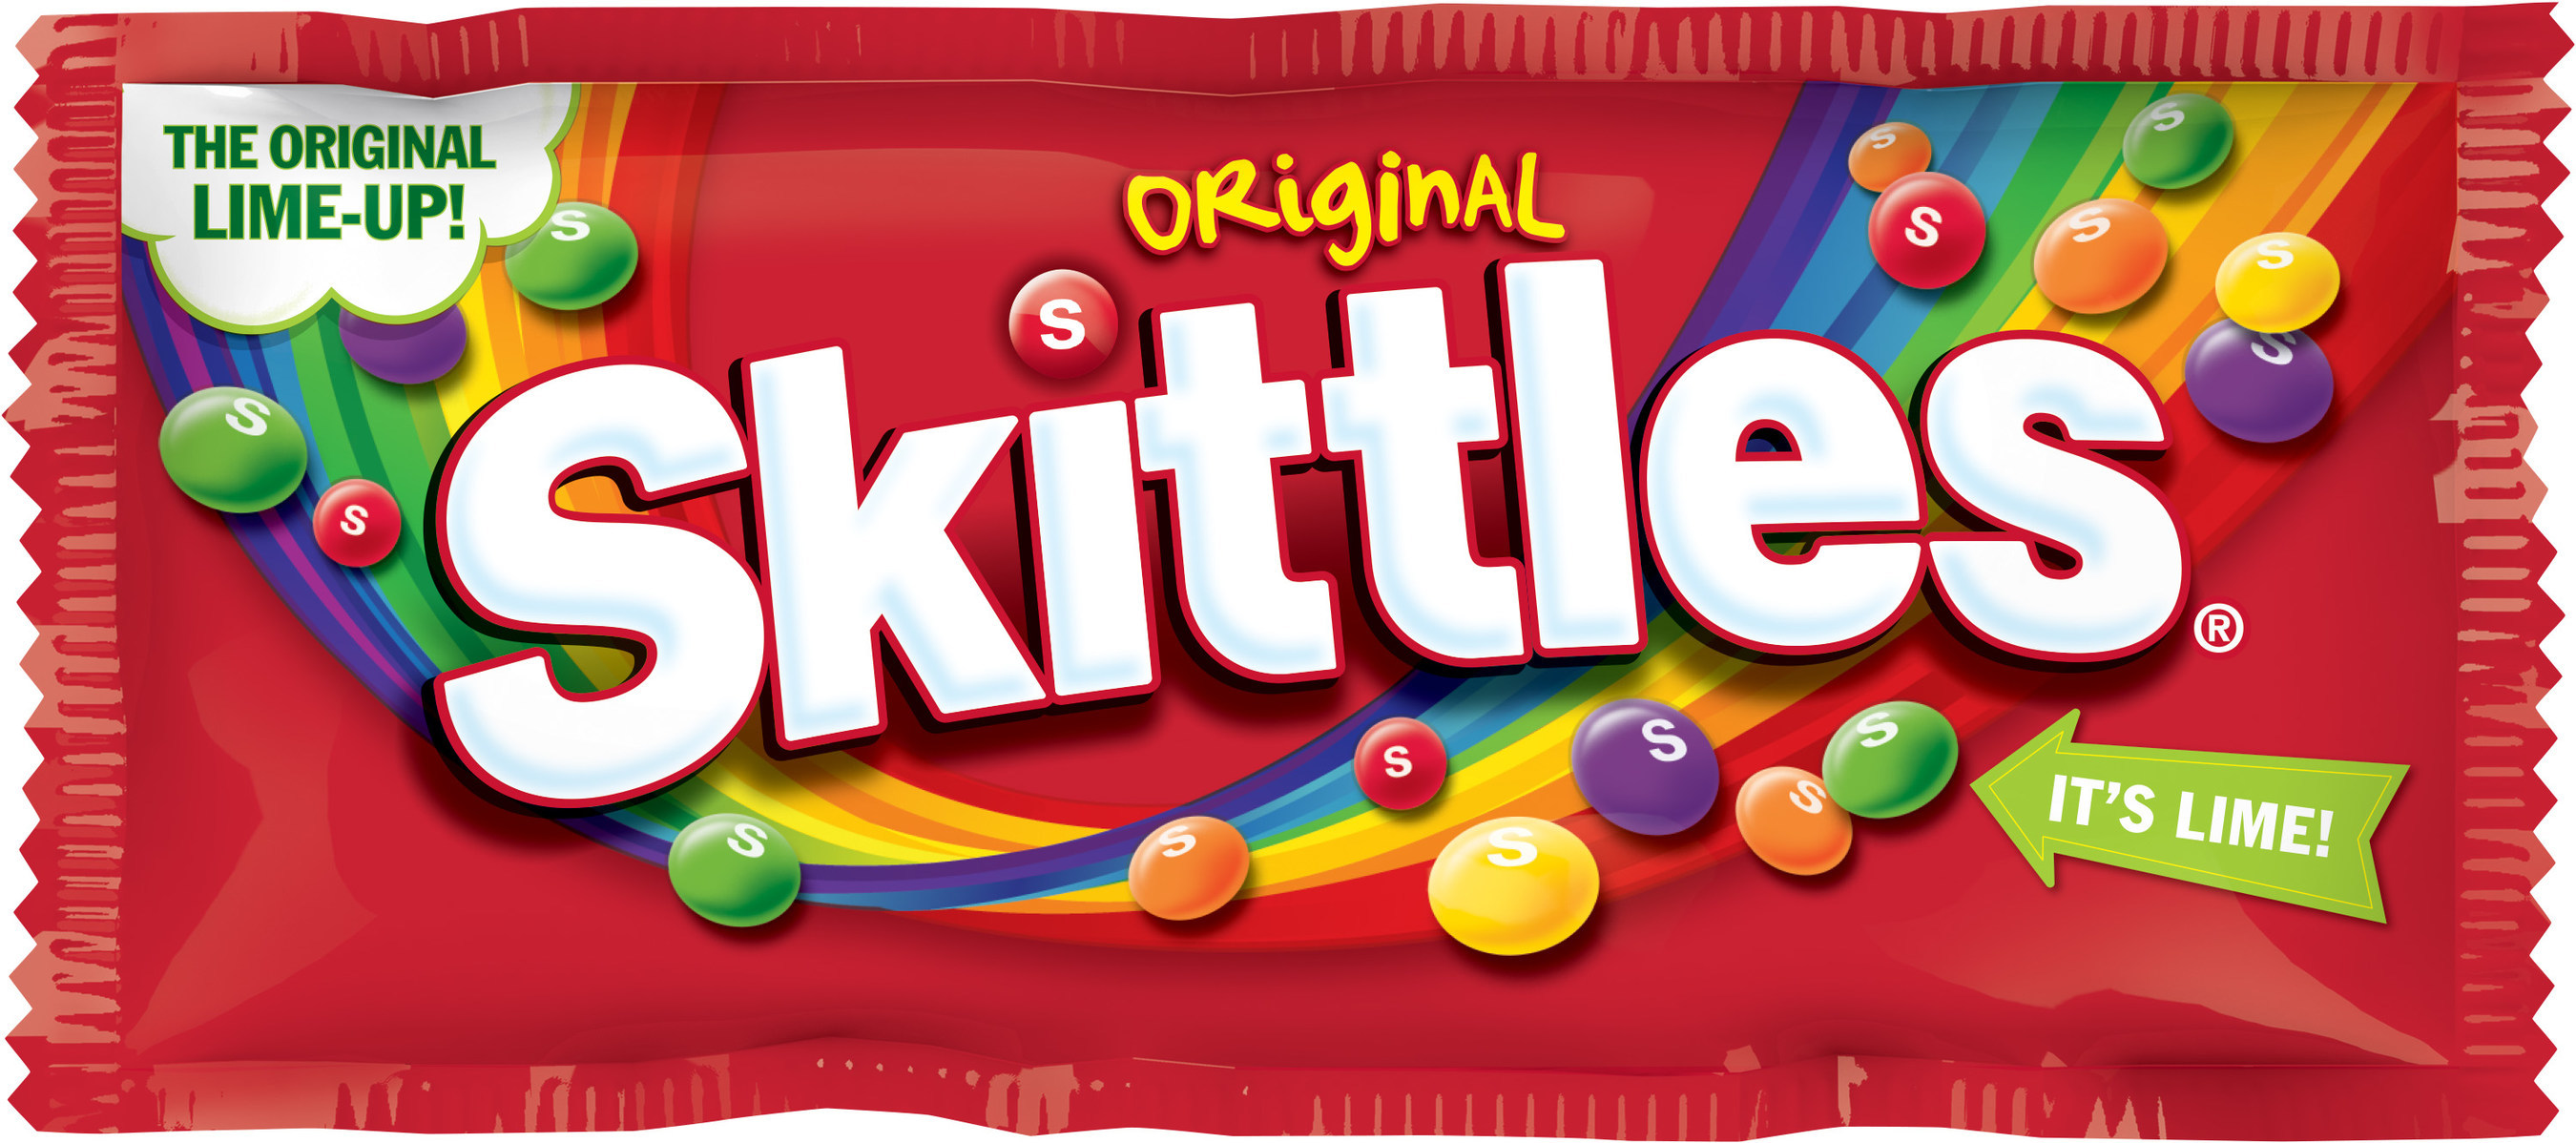 Are Skittles safe to eat?